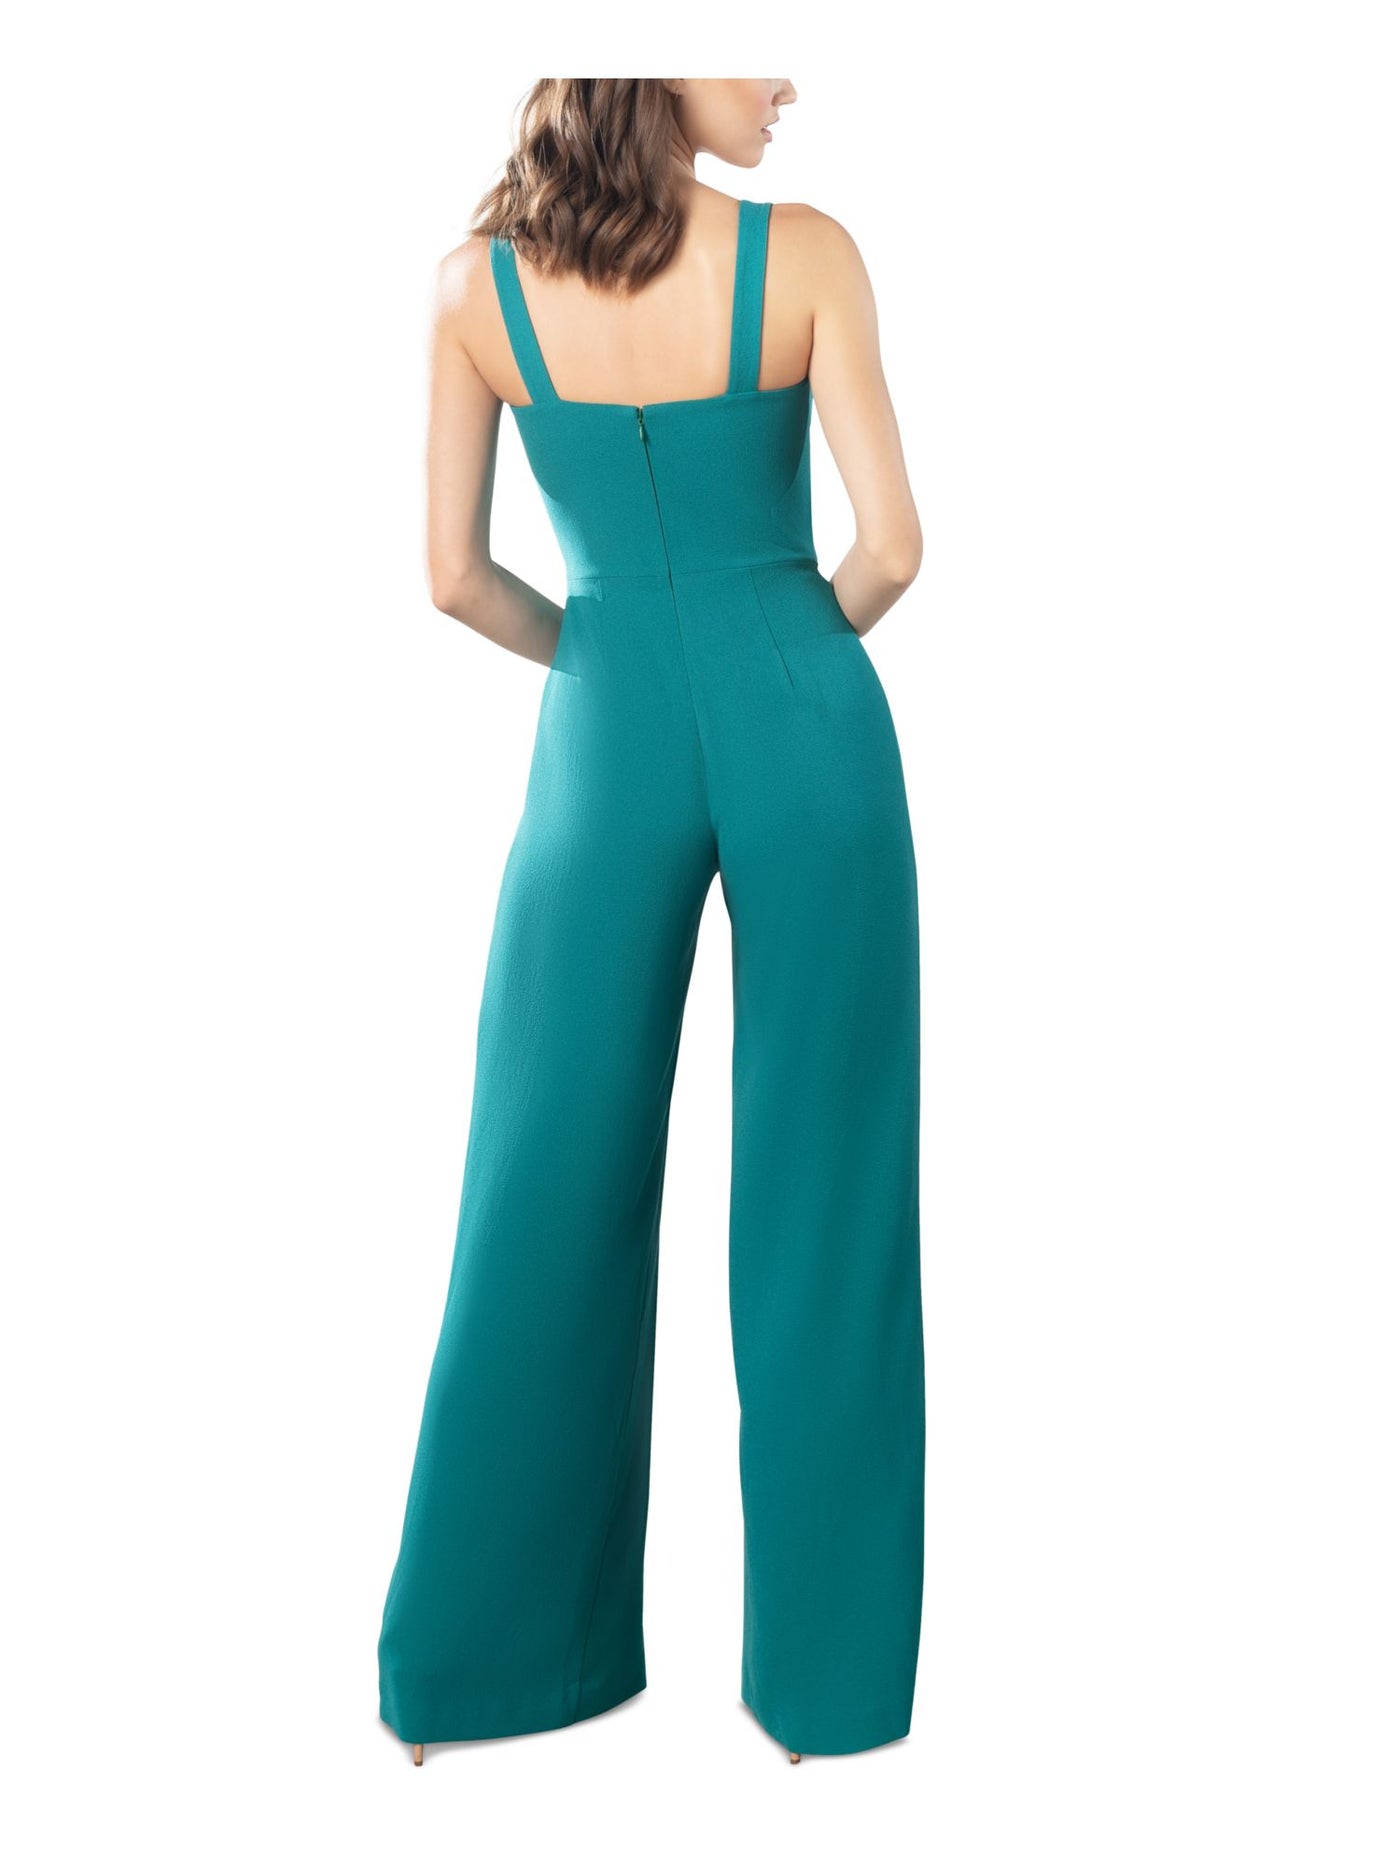 DRESS THE POPULATION Womens Teal Zippered Sleeveless Sweetheart Neckline Party Wide Leg Jumpsuit S